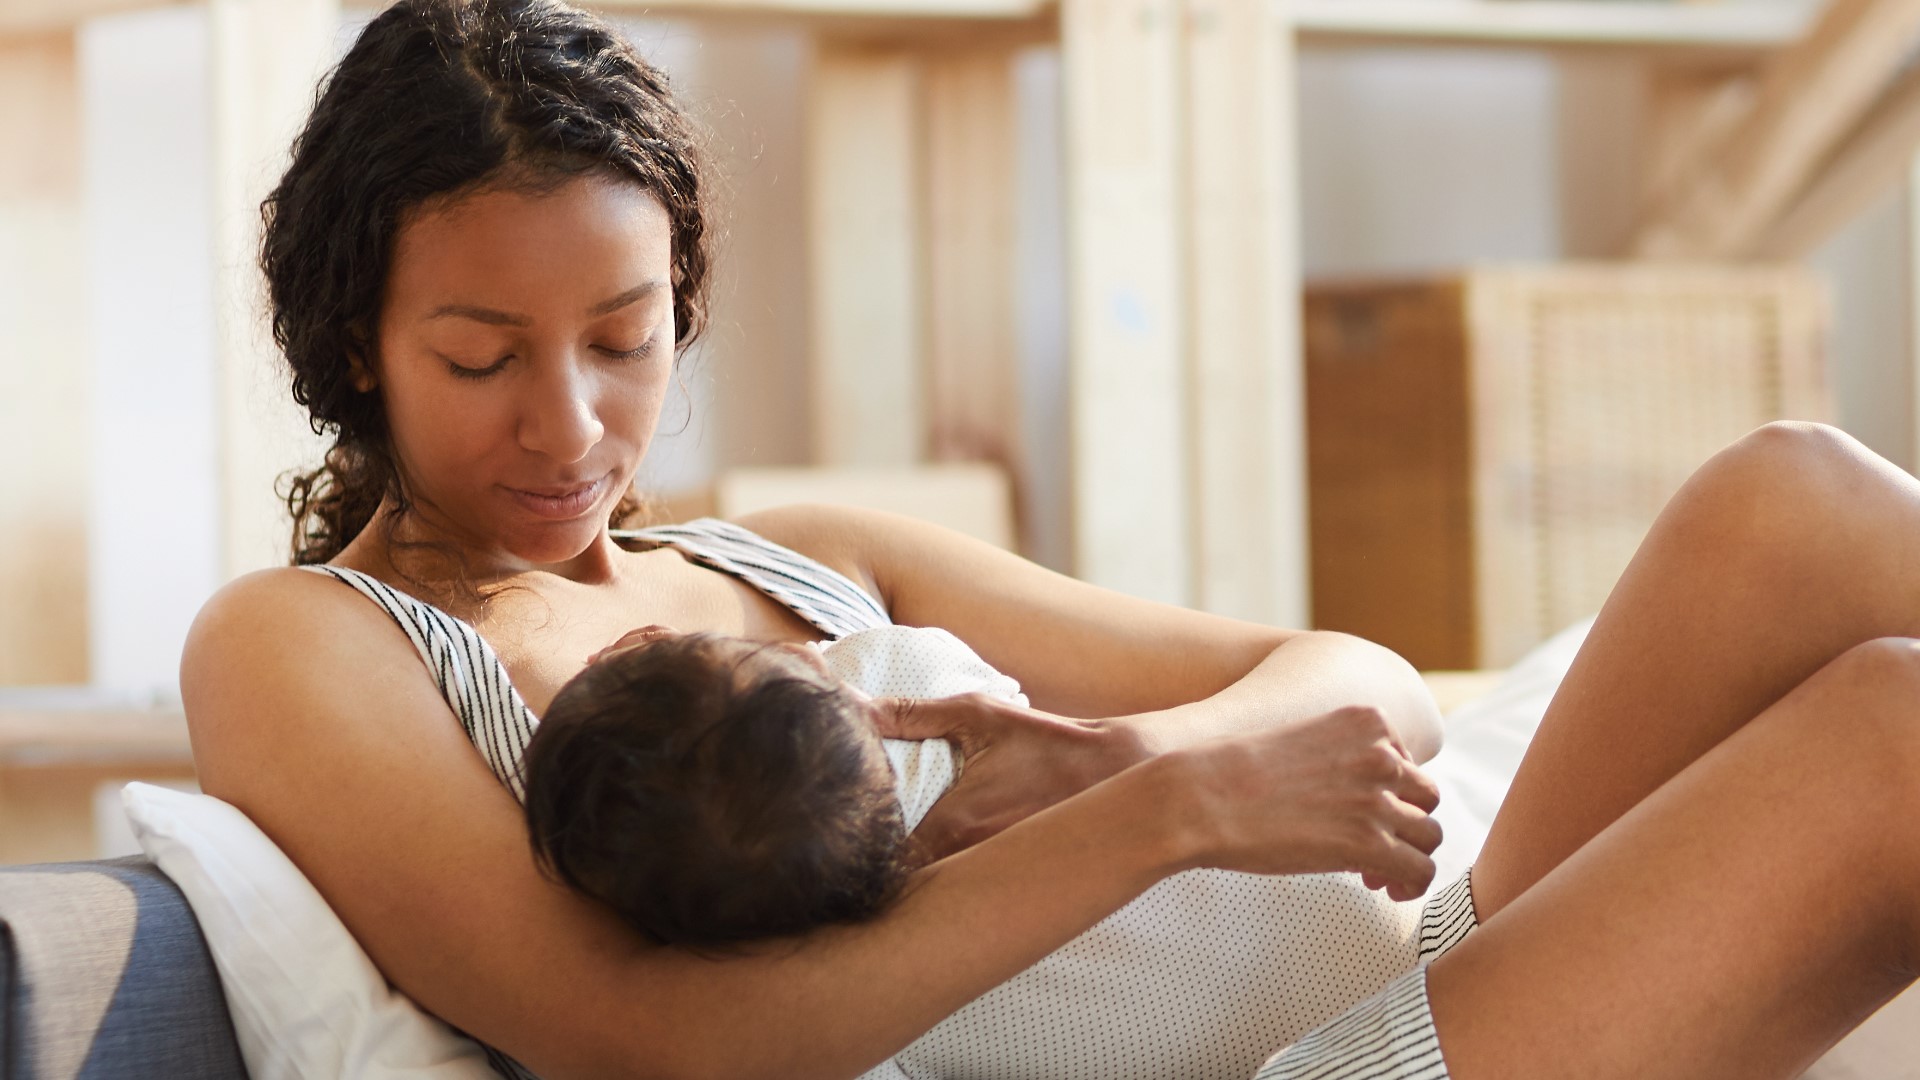 August is National Breastfeeding Month and local resources are out there to support struggling moms.